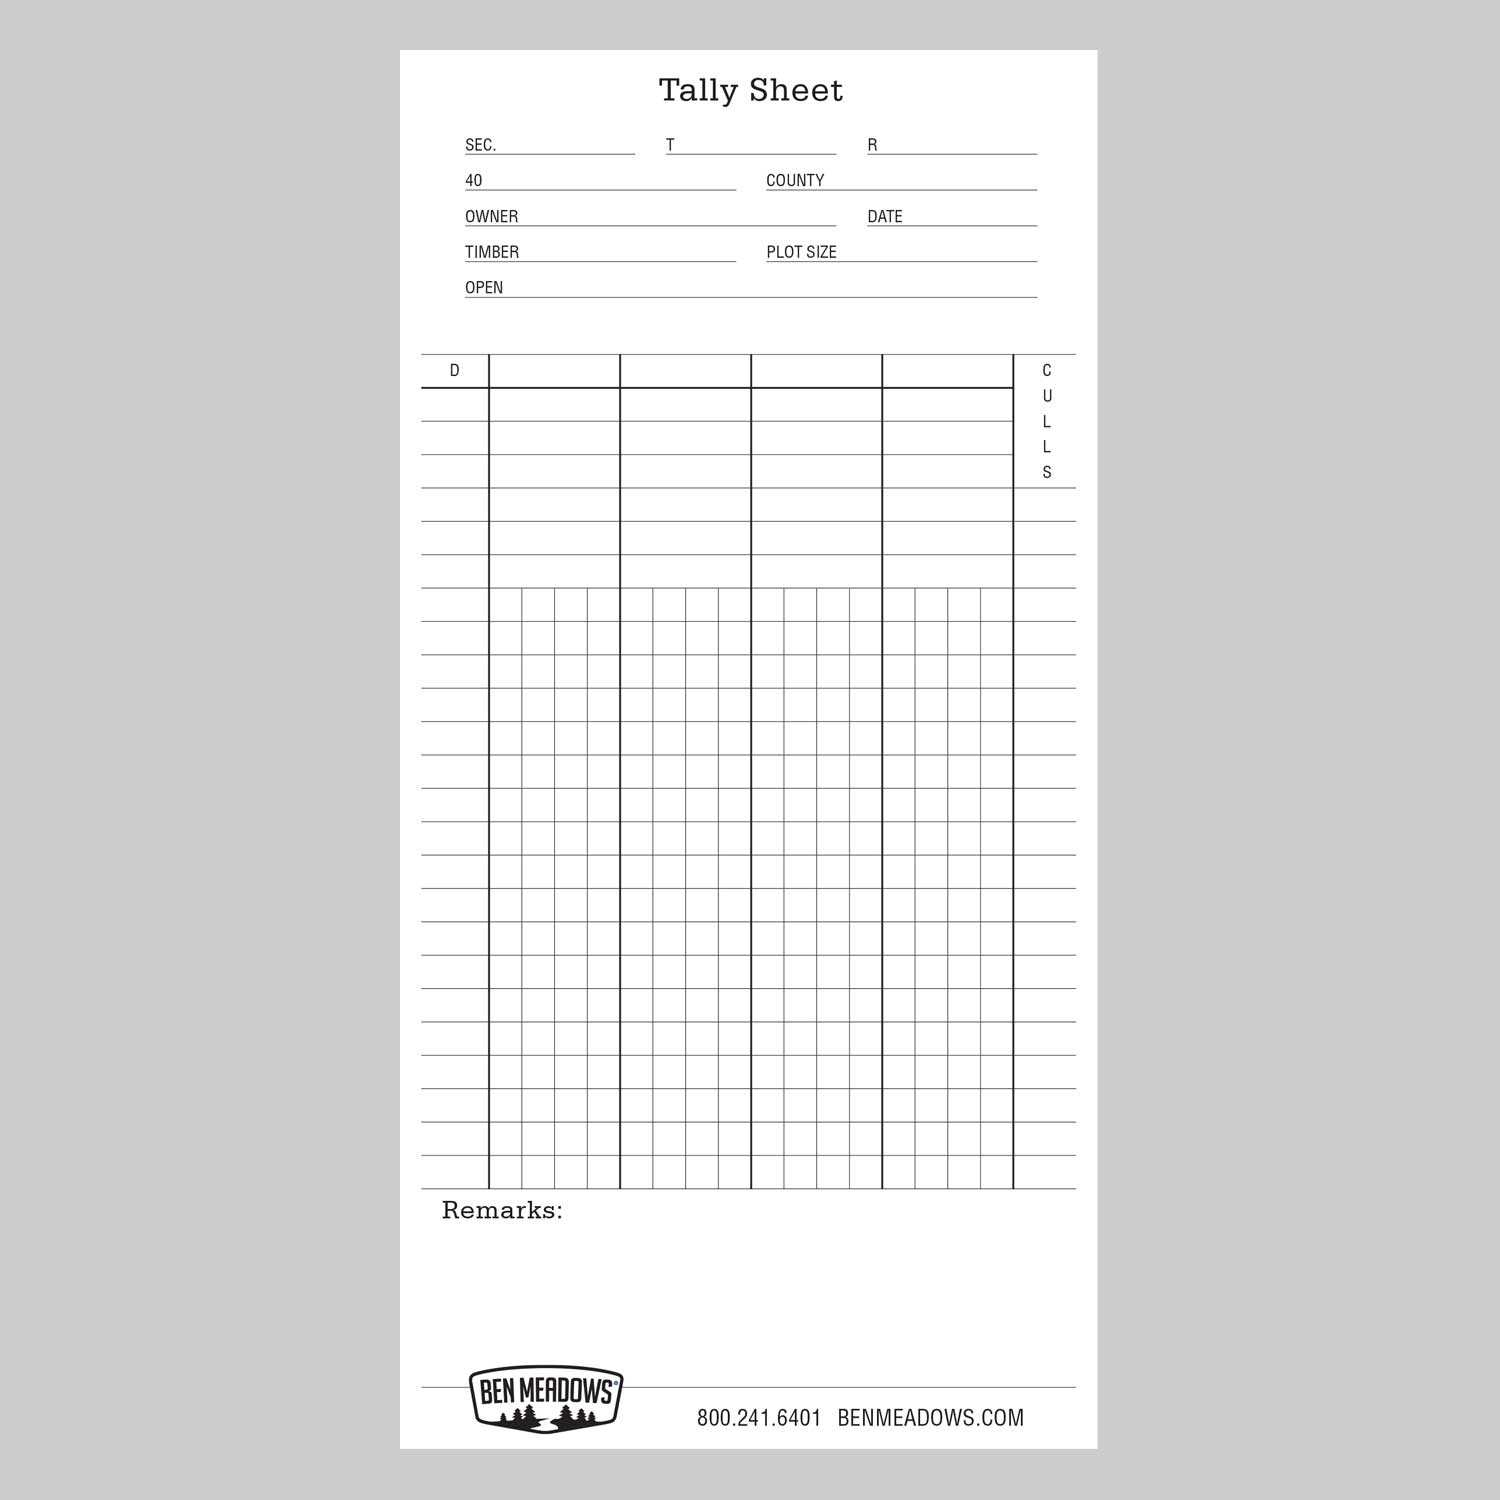 Pipe Tally Spreadsheet regarding Tally Sheets, One Species  Peco Sales